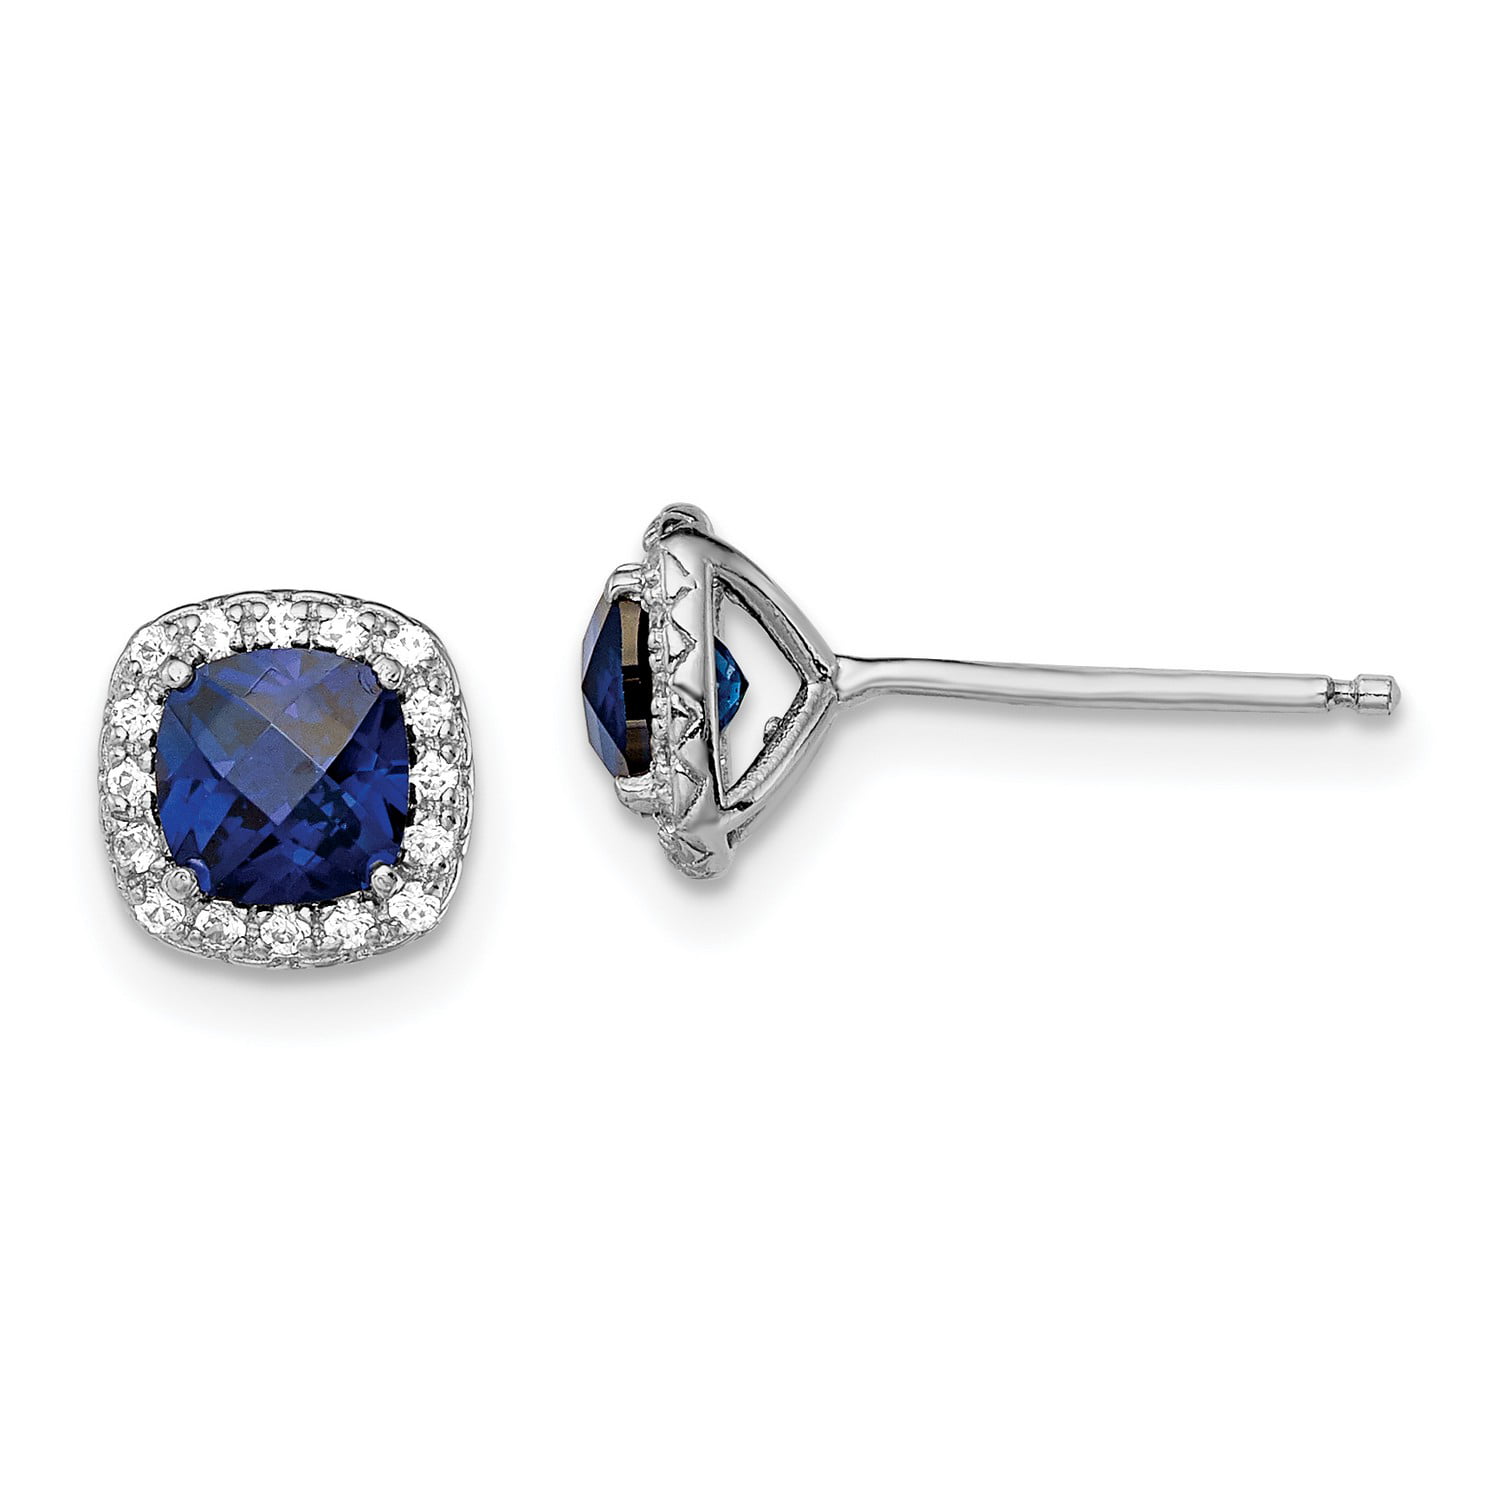 Details about   Sterling Silver Created Blue and White Sapphire Post Stud Earrings 6.5 x 7 MM